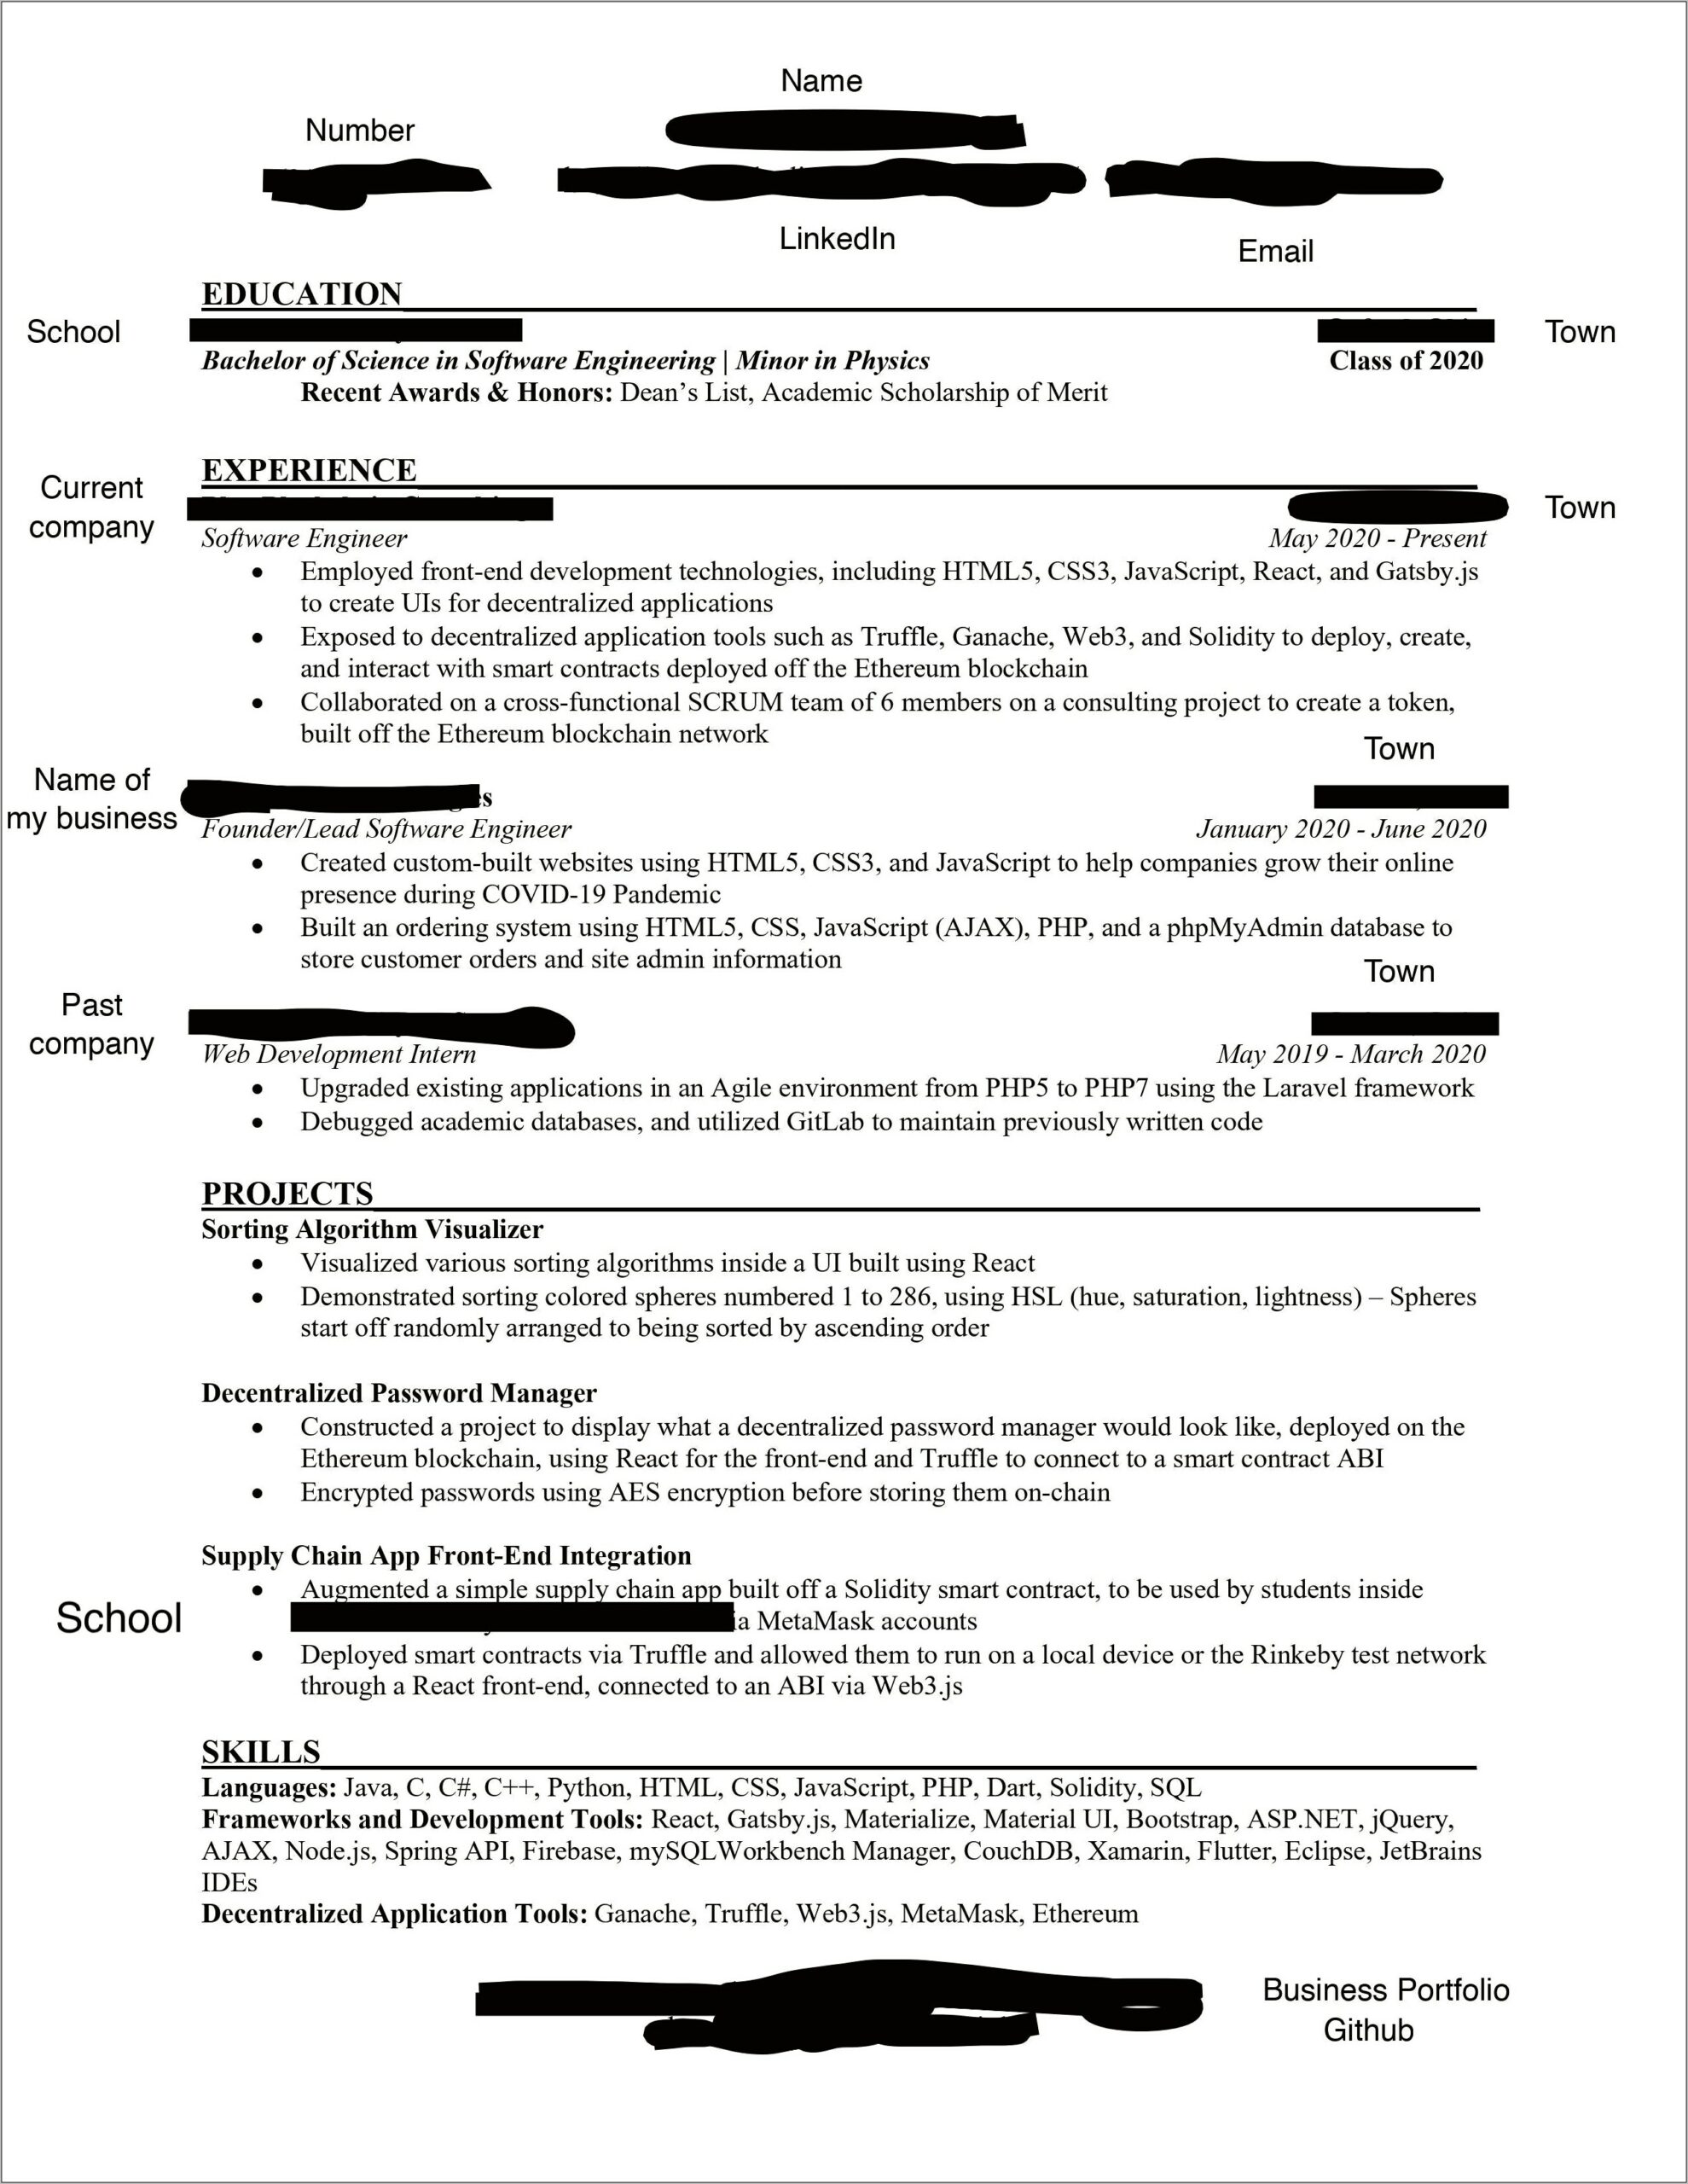 Submit Resume For Temp Work At Music Companies